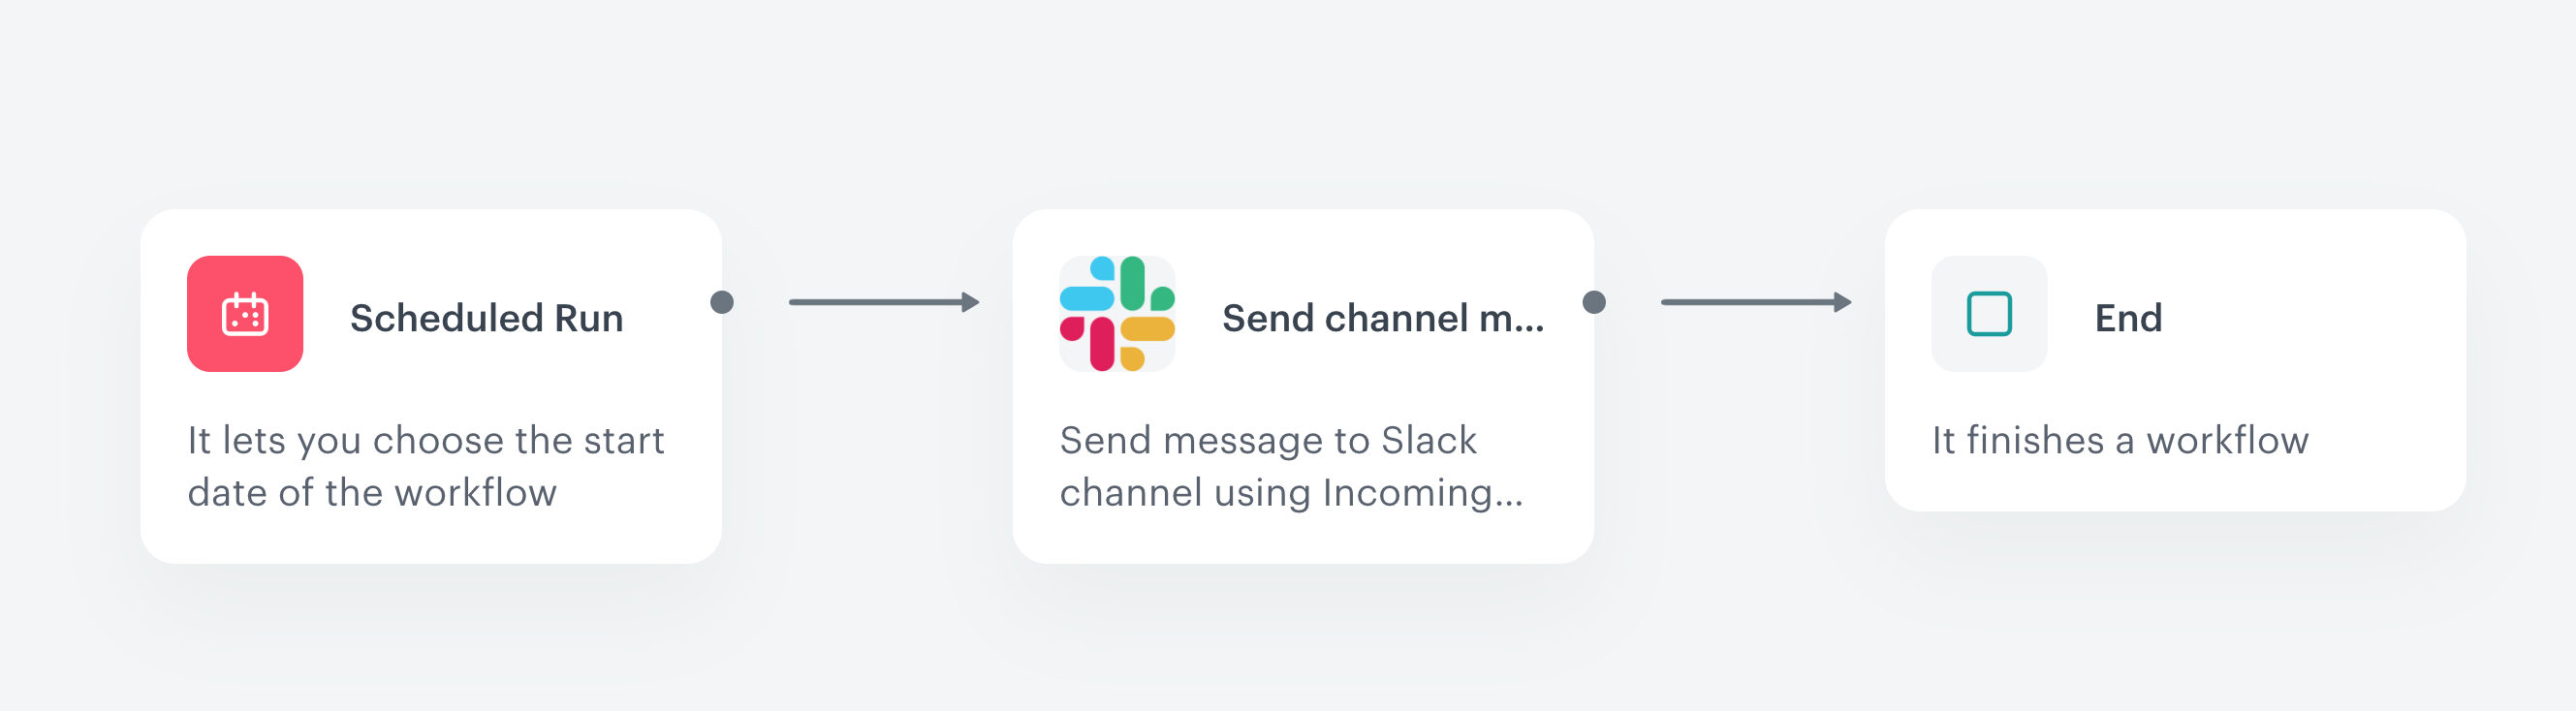 Configuration of the workflow that sends alert messages based on the metric results to the Slack channel